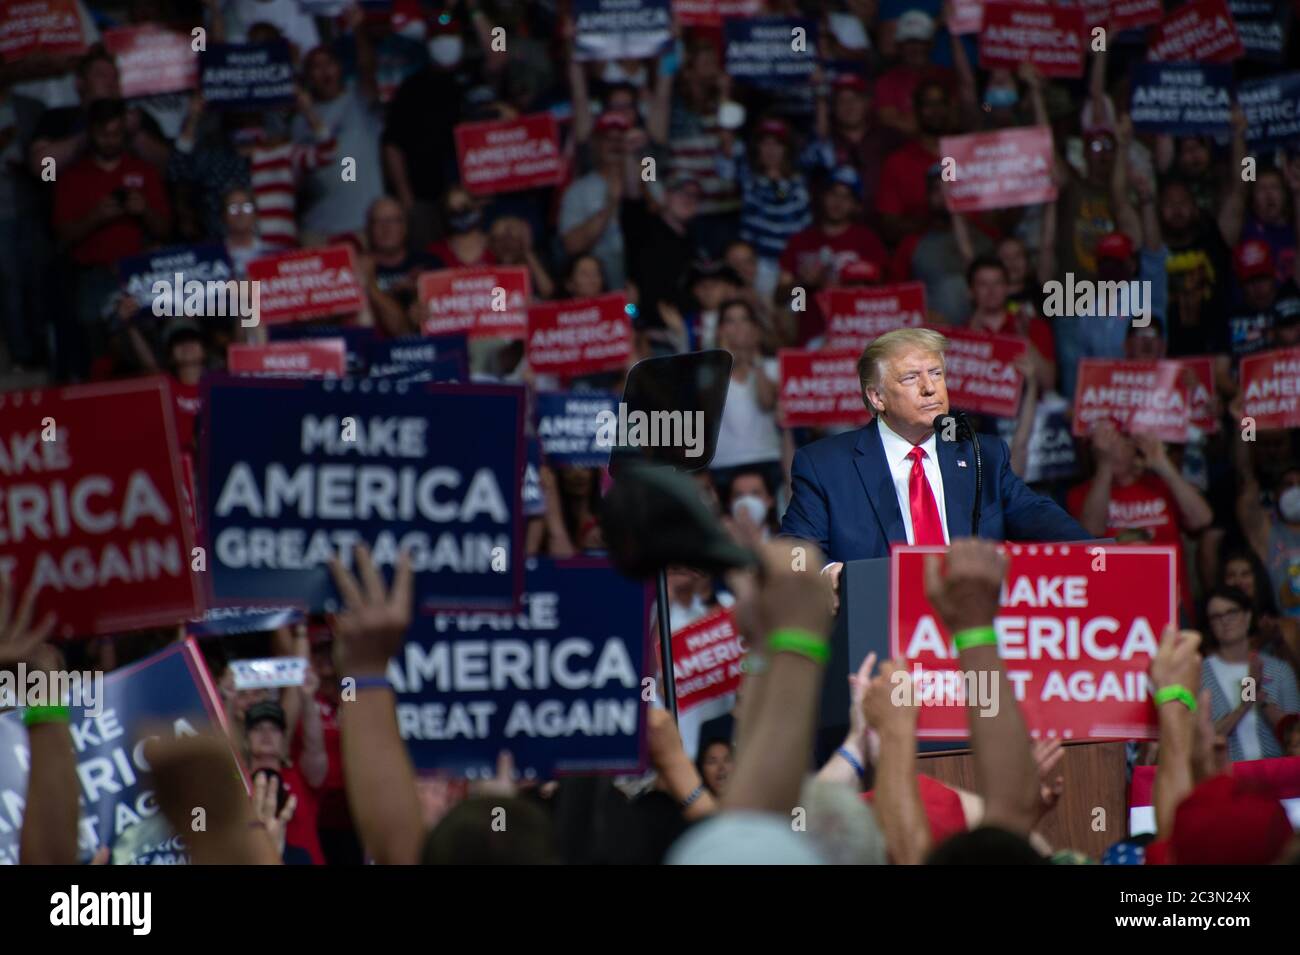 Tulsa, Oklahoma, USA. 20th June, 2020. TULSA, Oklahoma, USA.  - June 20, 2020: US President Donald J. Trump holds campaign rally in Bank of Oklahoma Center. The campaign rally is the first since March 2020 when most of the country locked down due to Covid-19. Takes a brief pause and contemplates. Credit: albert halim/Alamy Live News Stock Photo